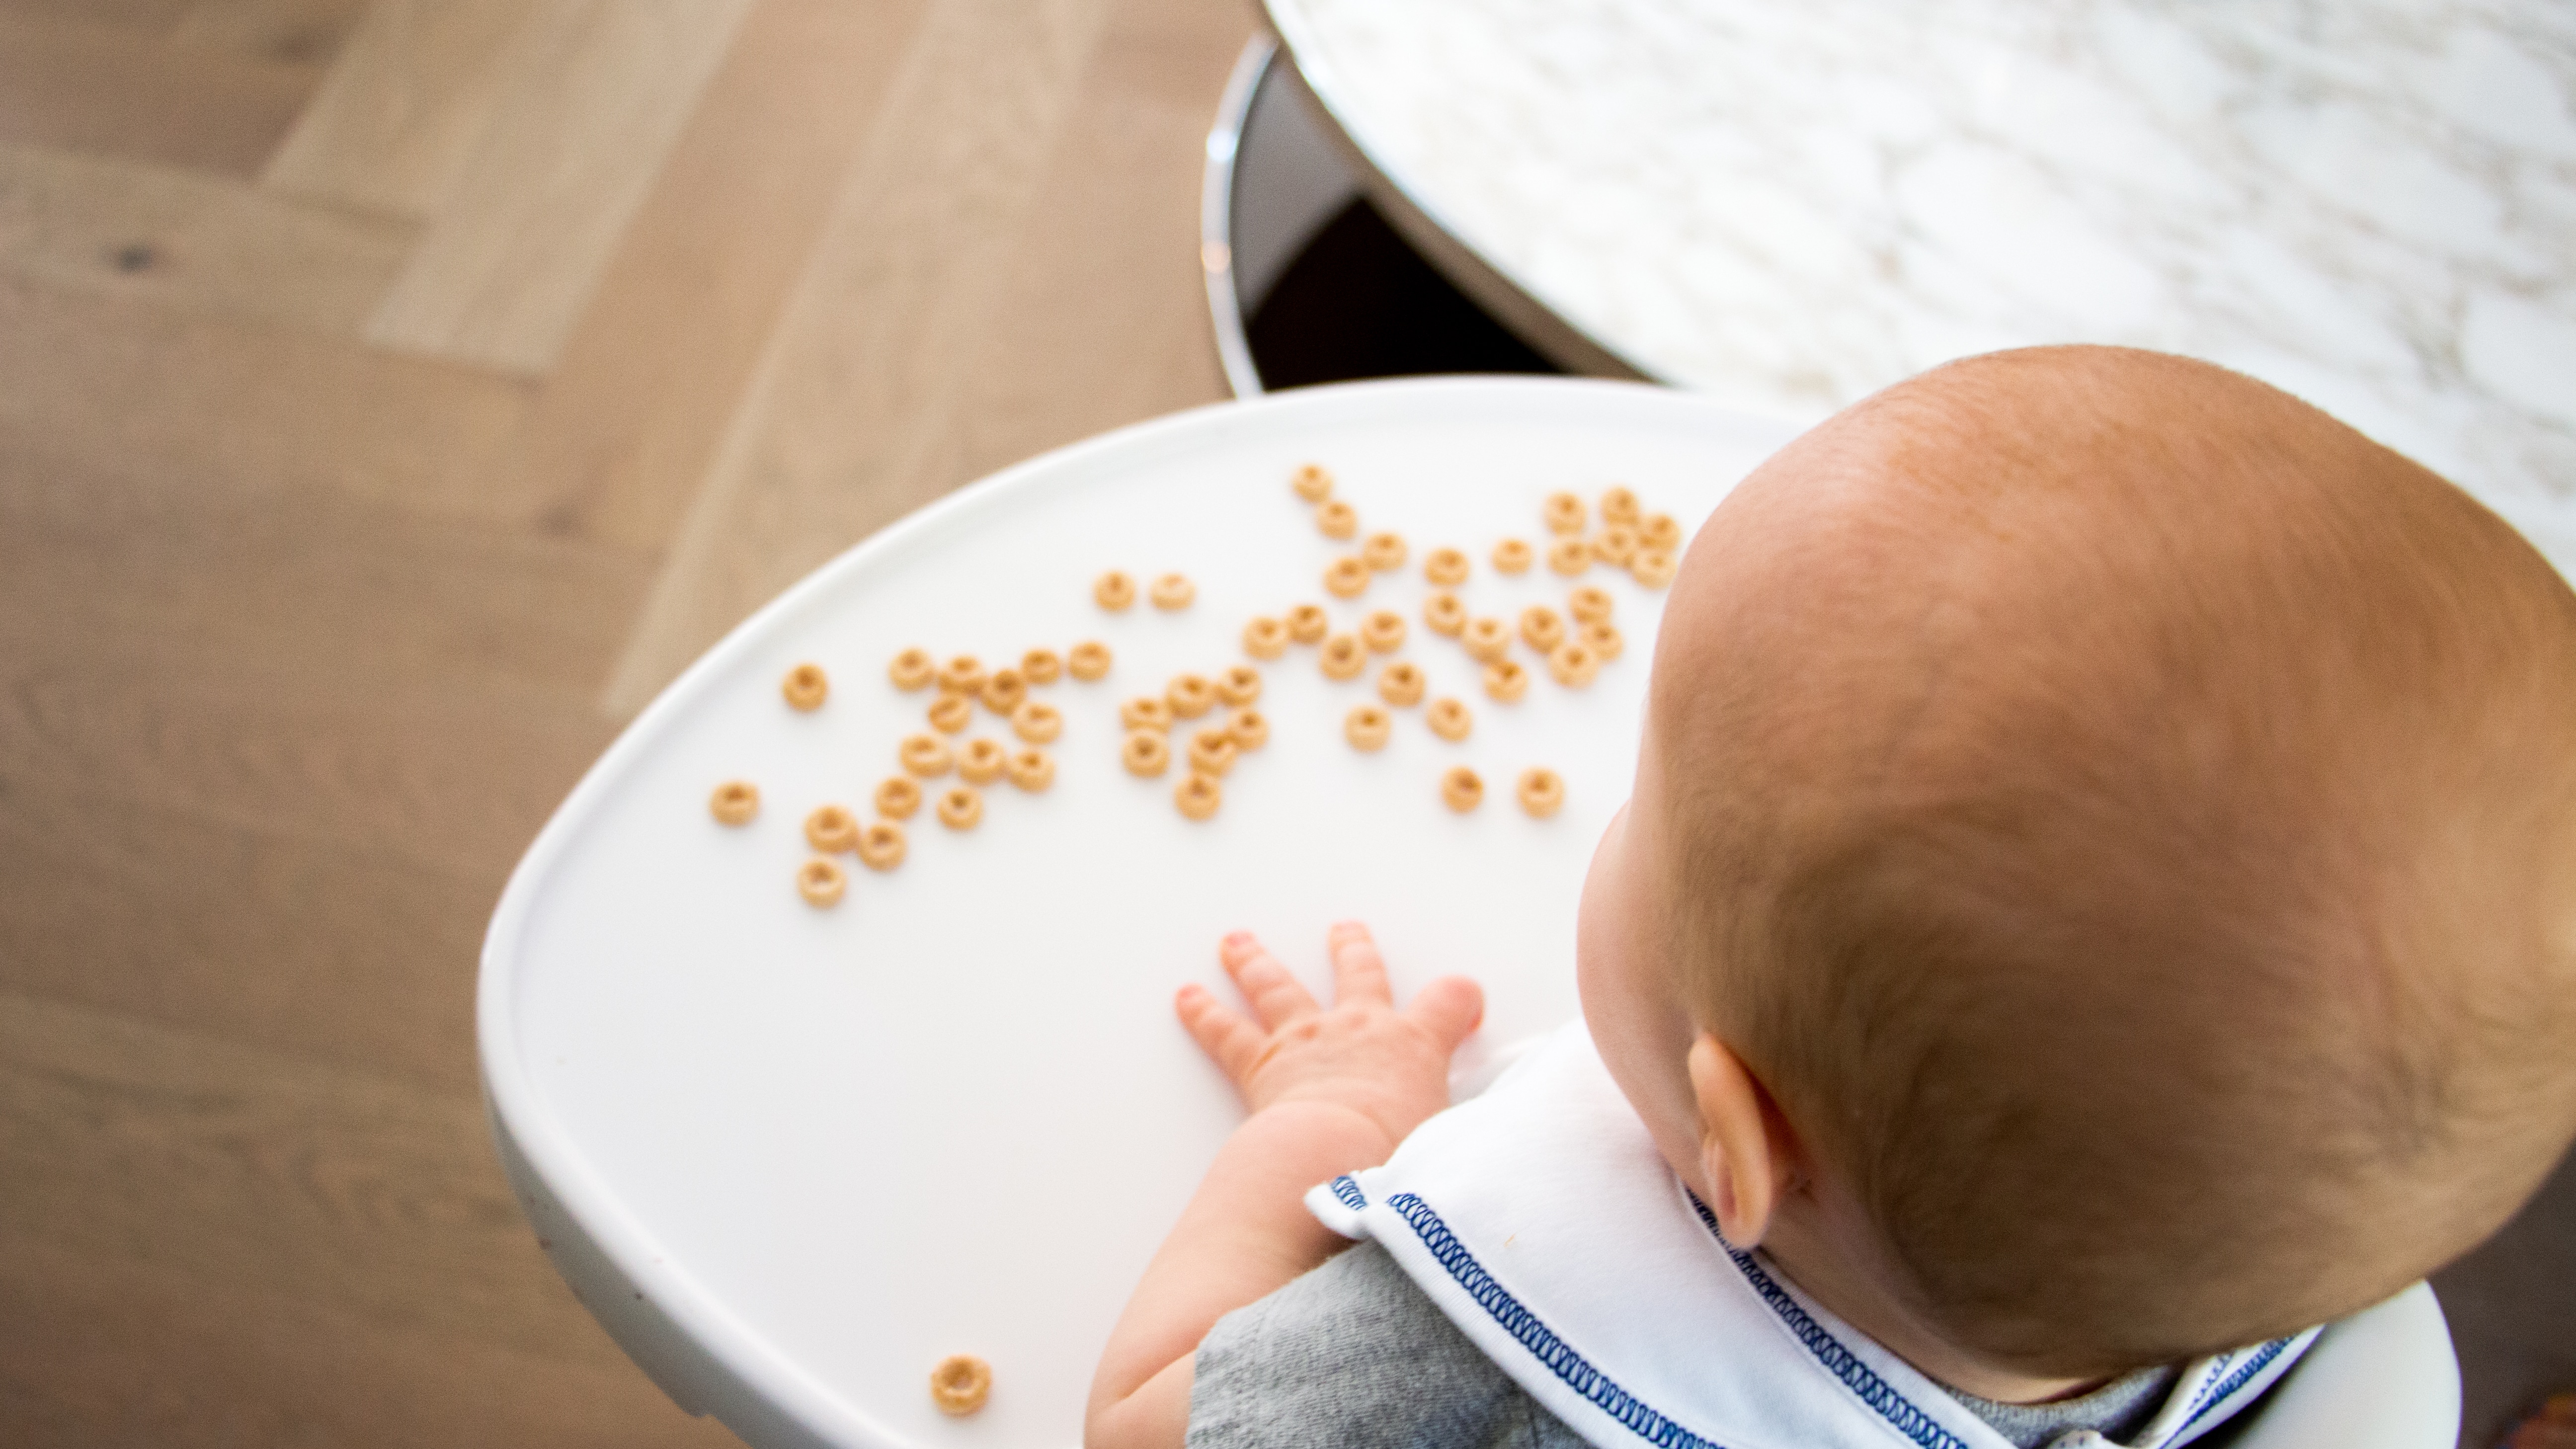 3 Tips on How to Spoon Feed Baby (purees or BLW) - Baby Foode